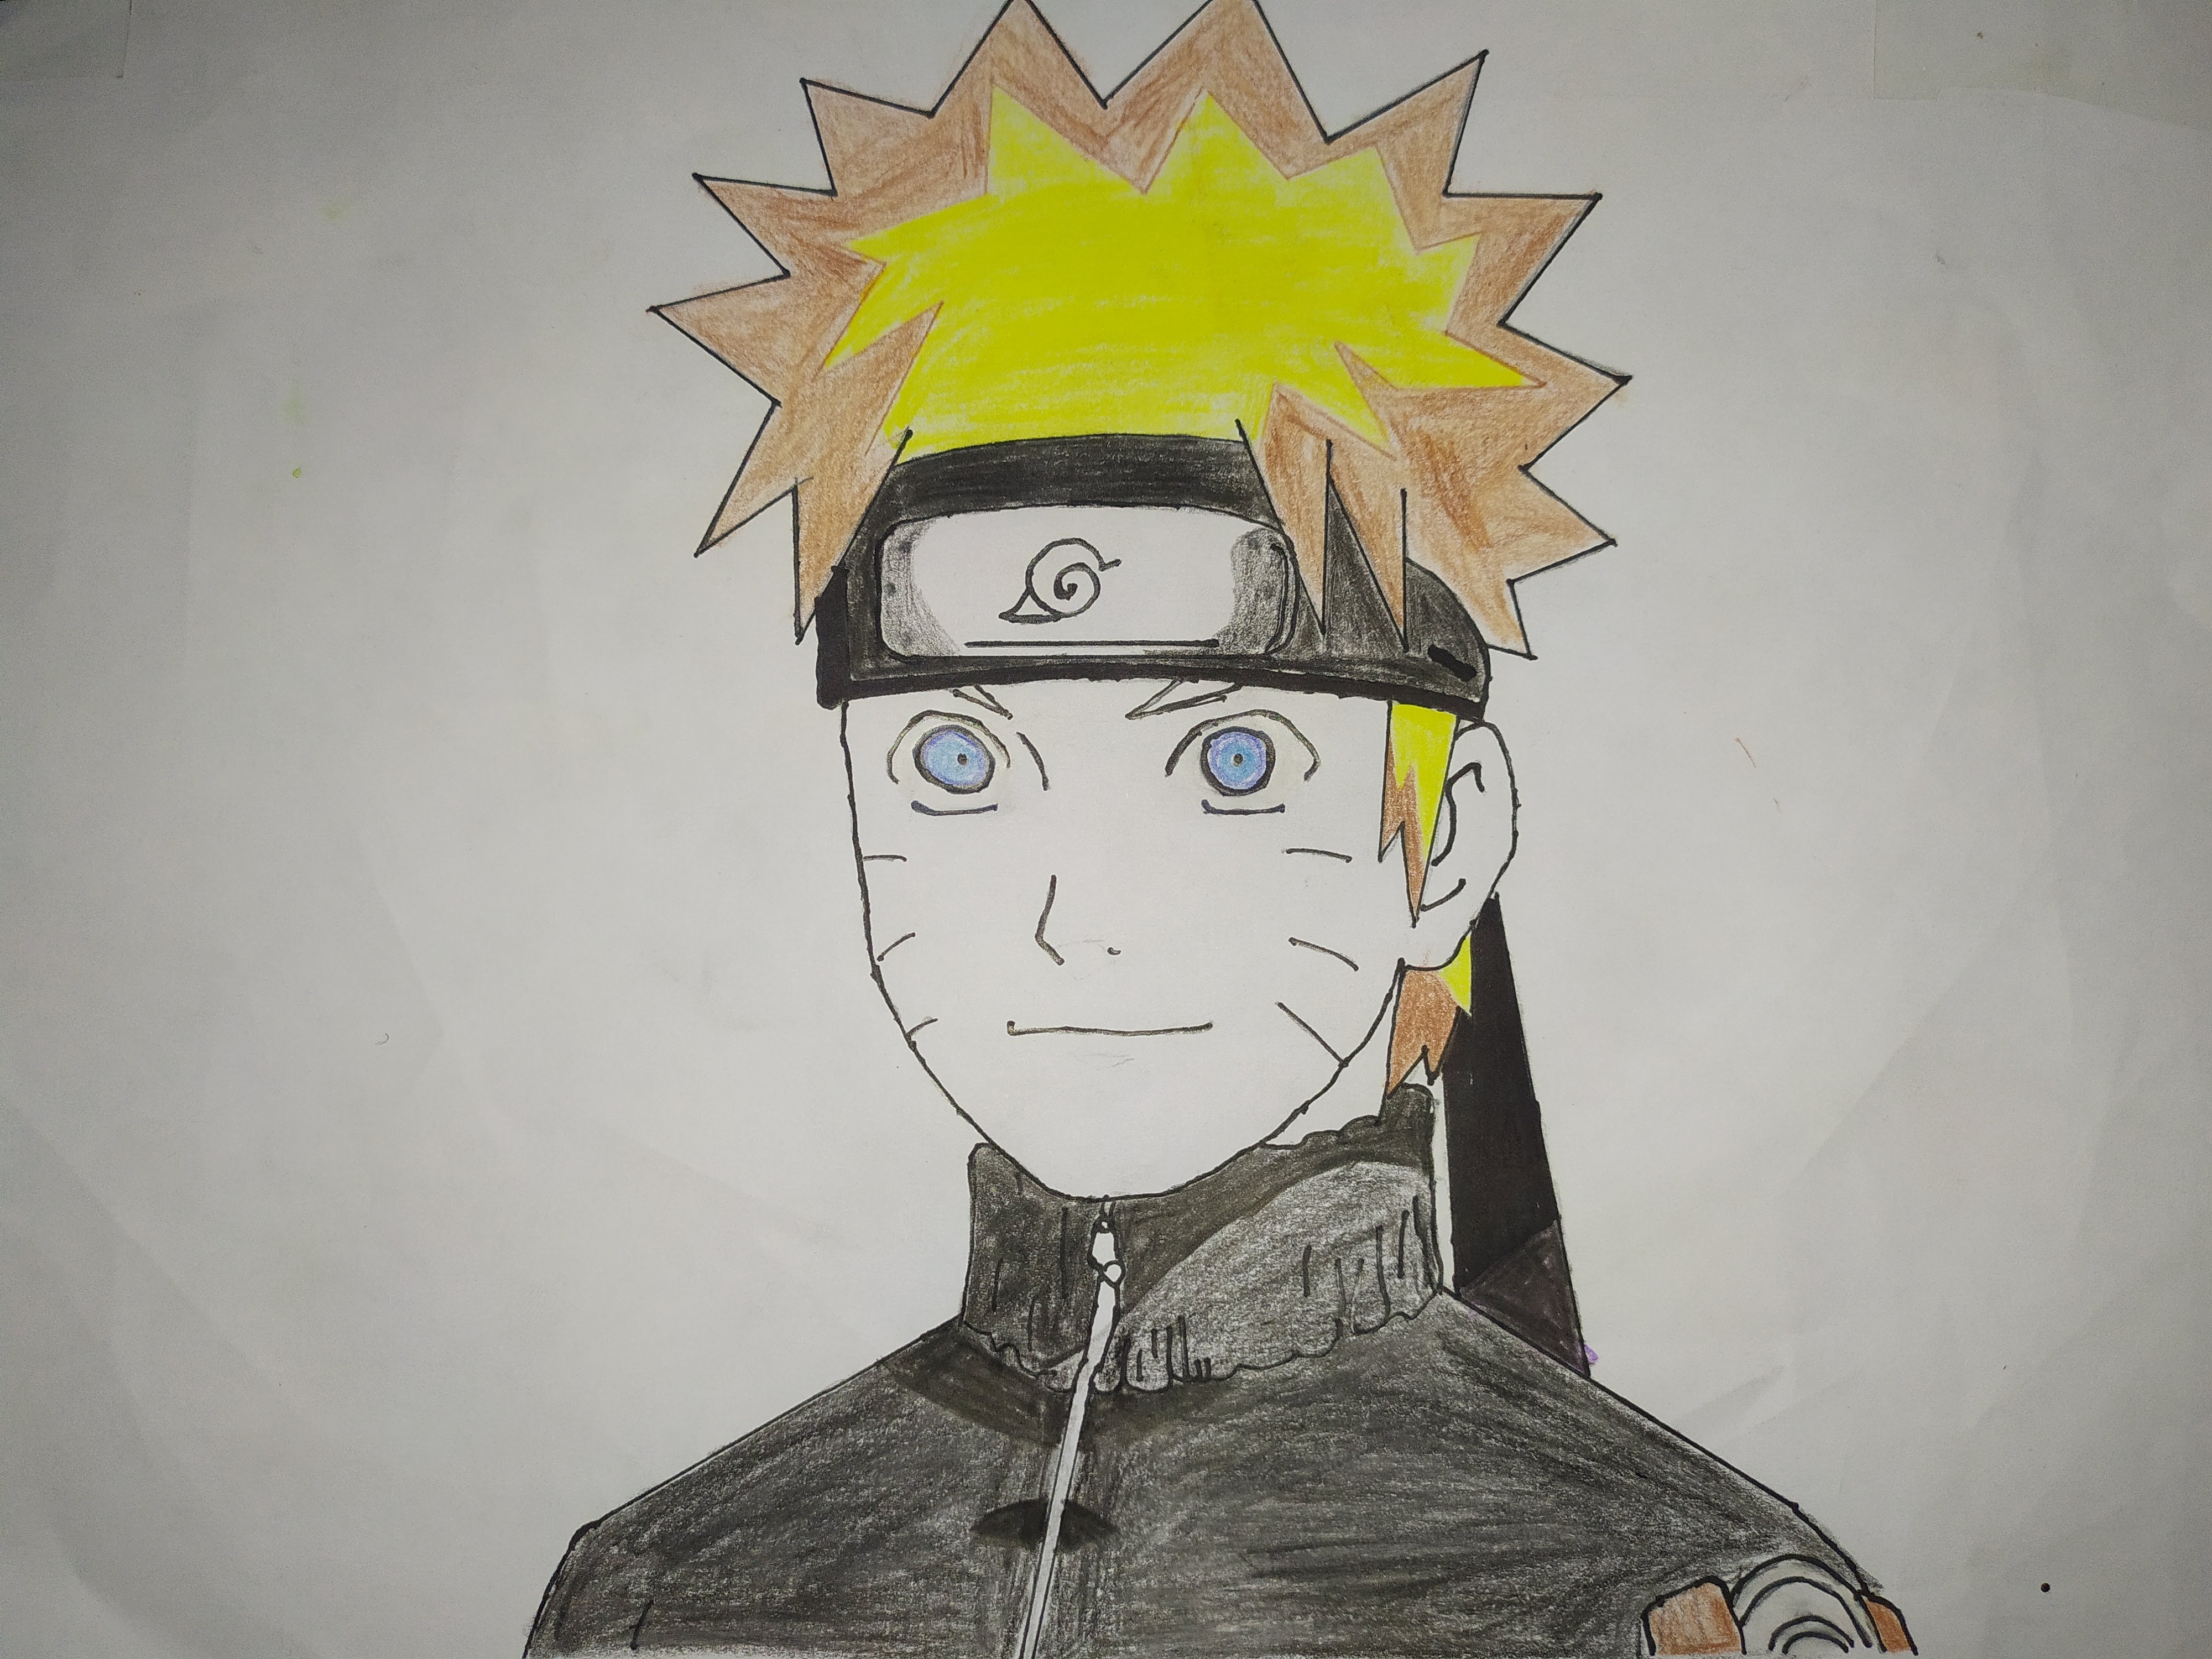 My Drawing of NARUTO. My Favorite Anime Character.